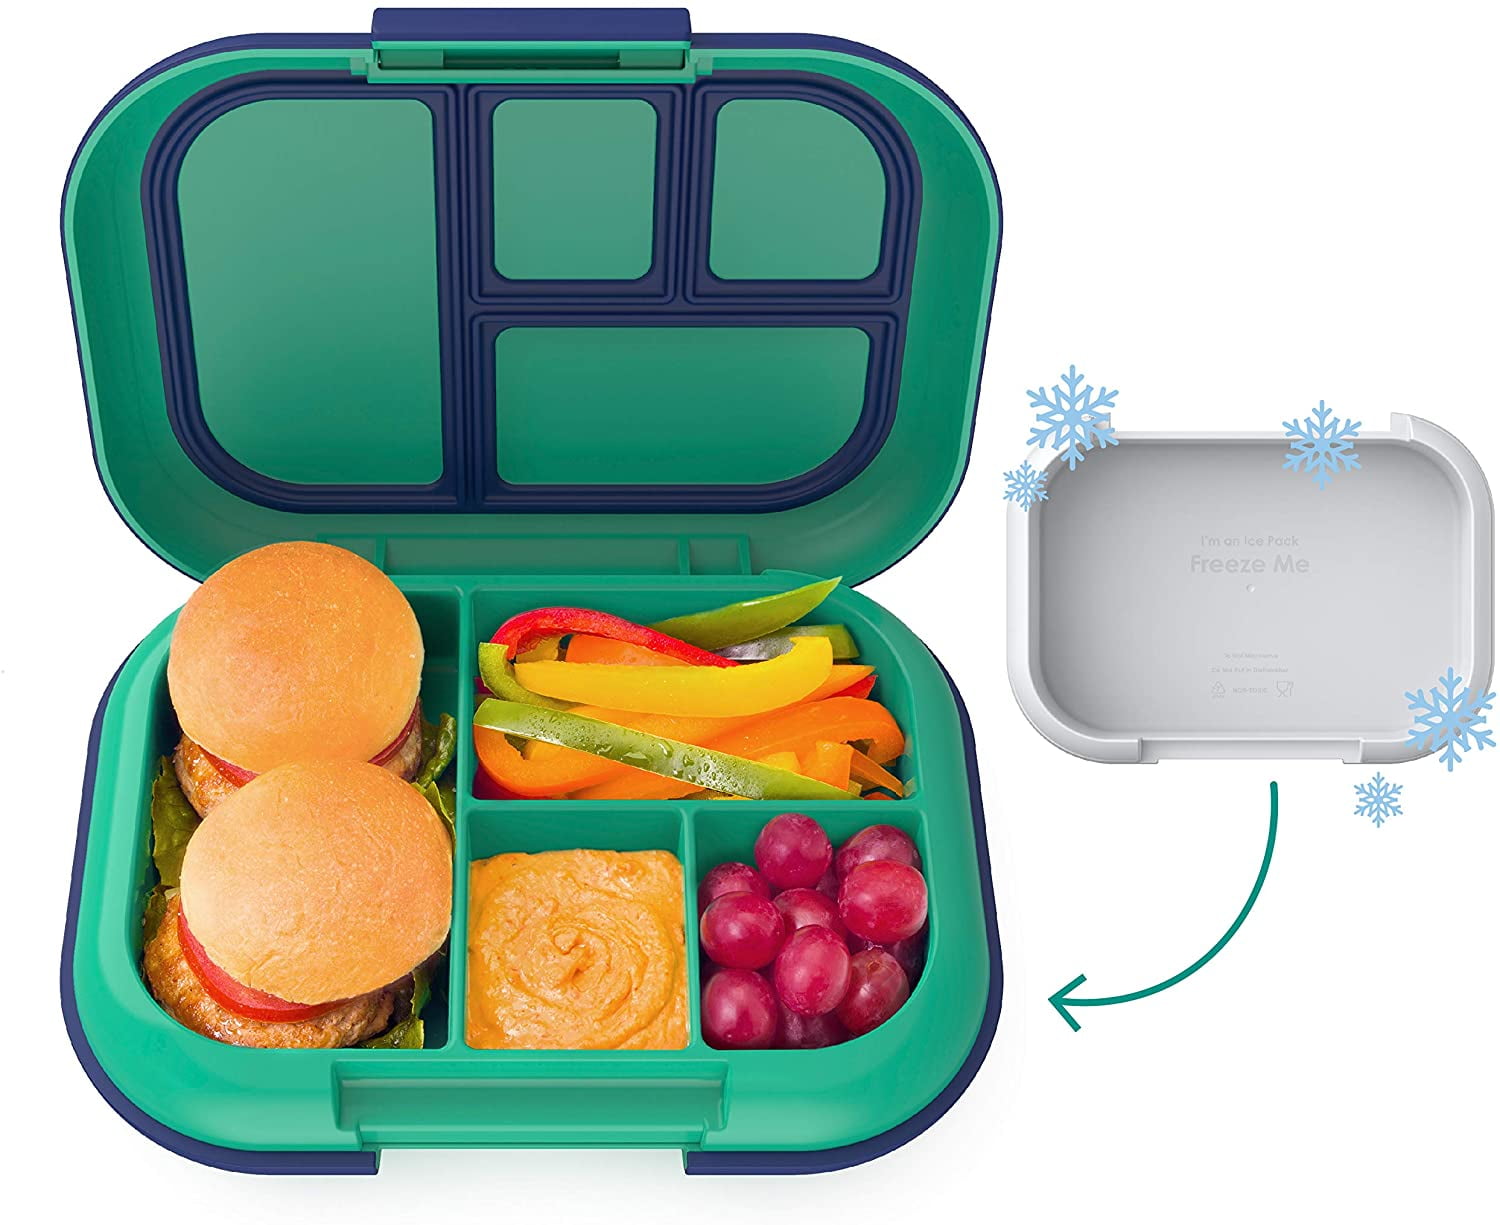 Leakproof Cold Pack Food Container